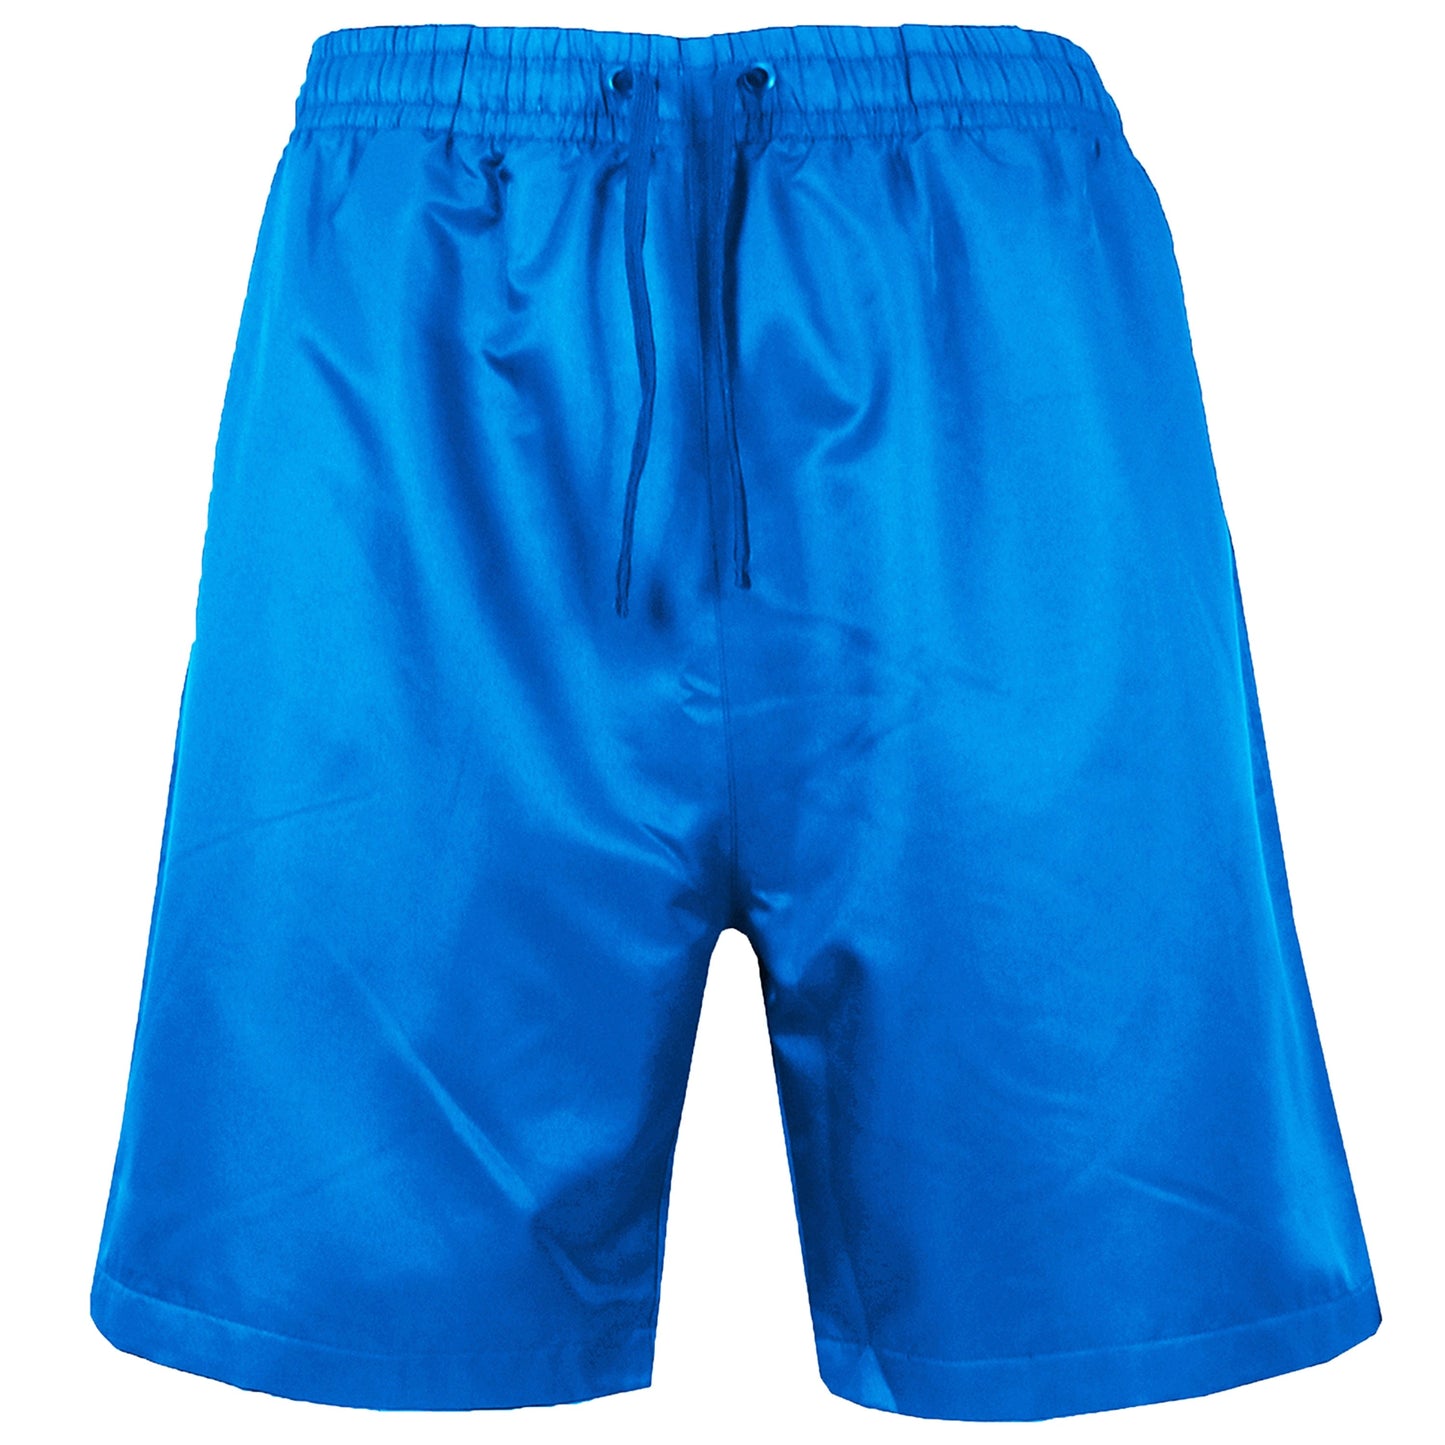 Men's Active Training Performance Shorts - GalaxybyHarvic